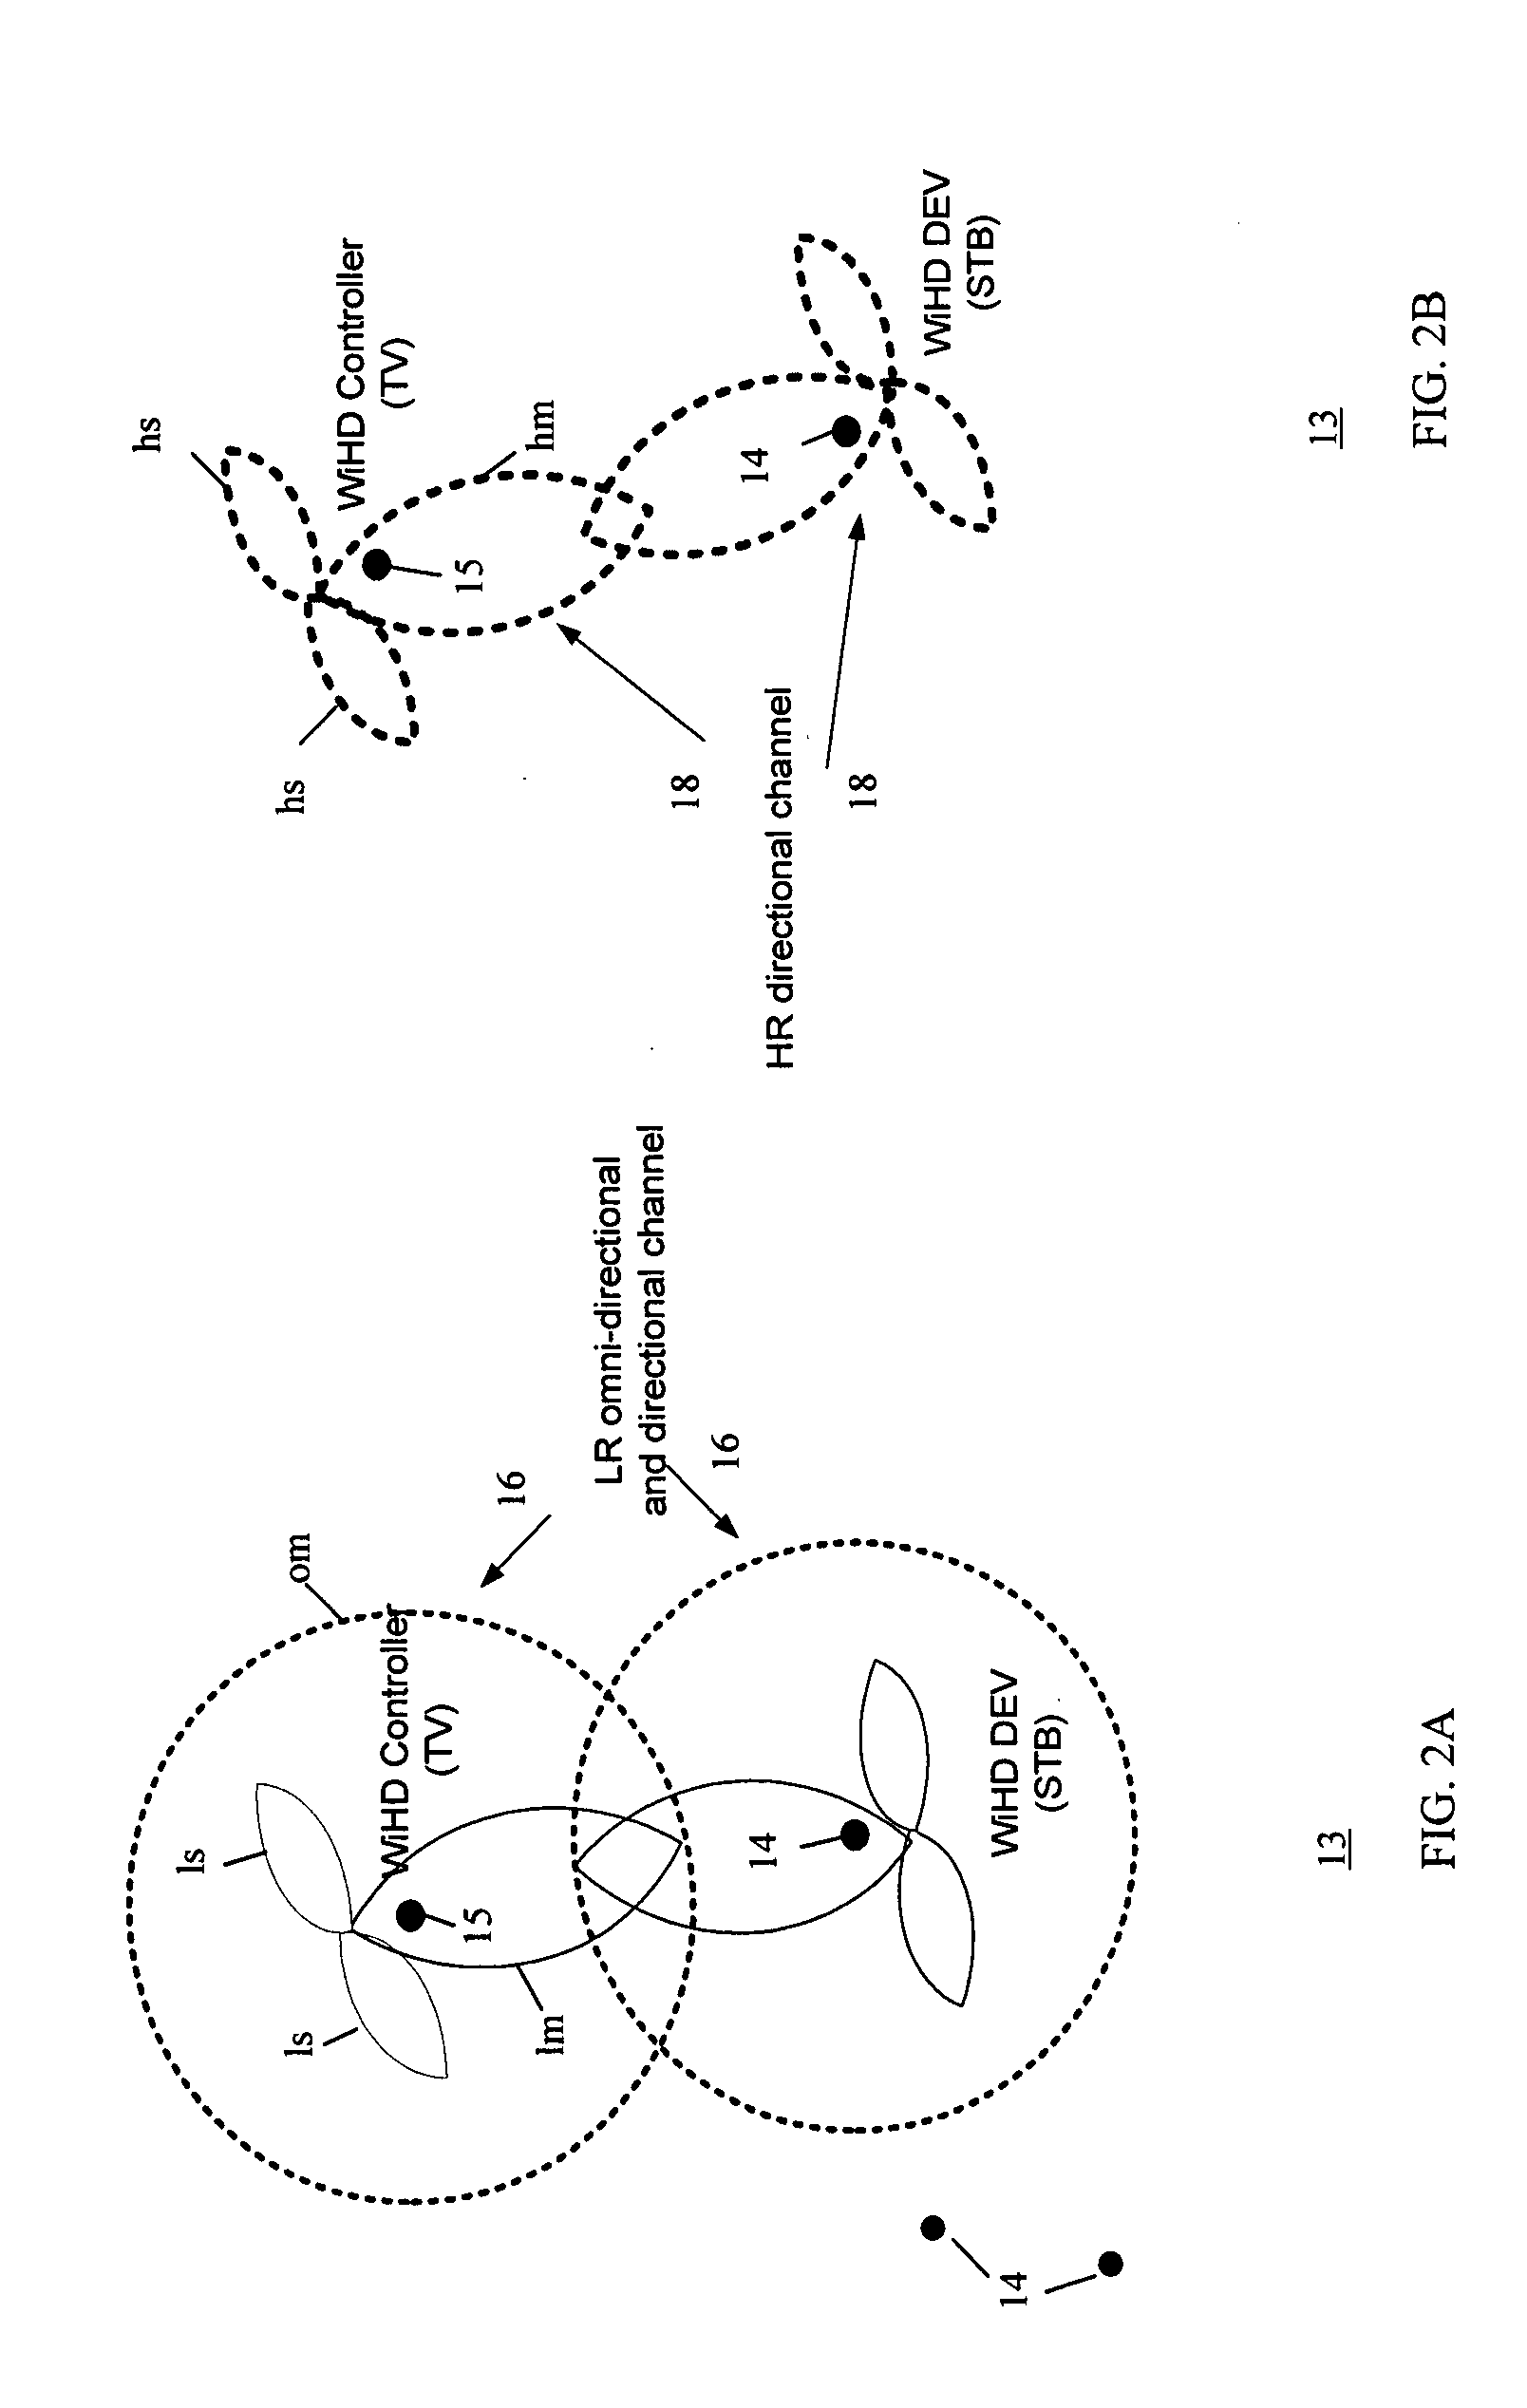 Method and system for reliable broadcast or multicast communication in wireless networks